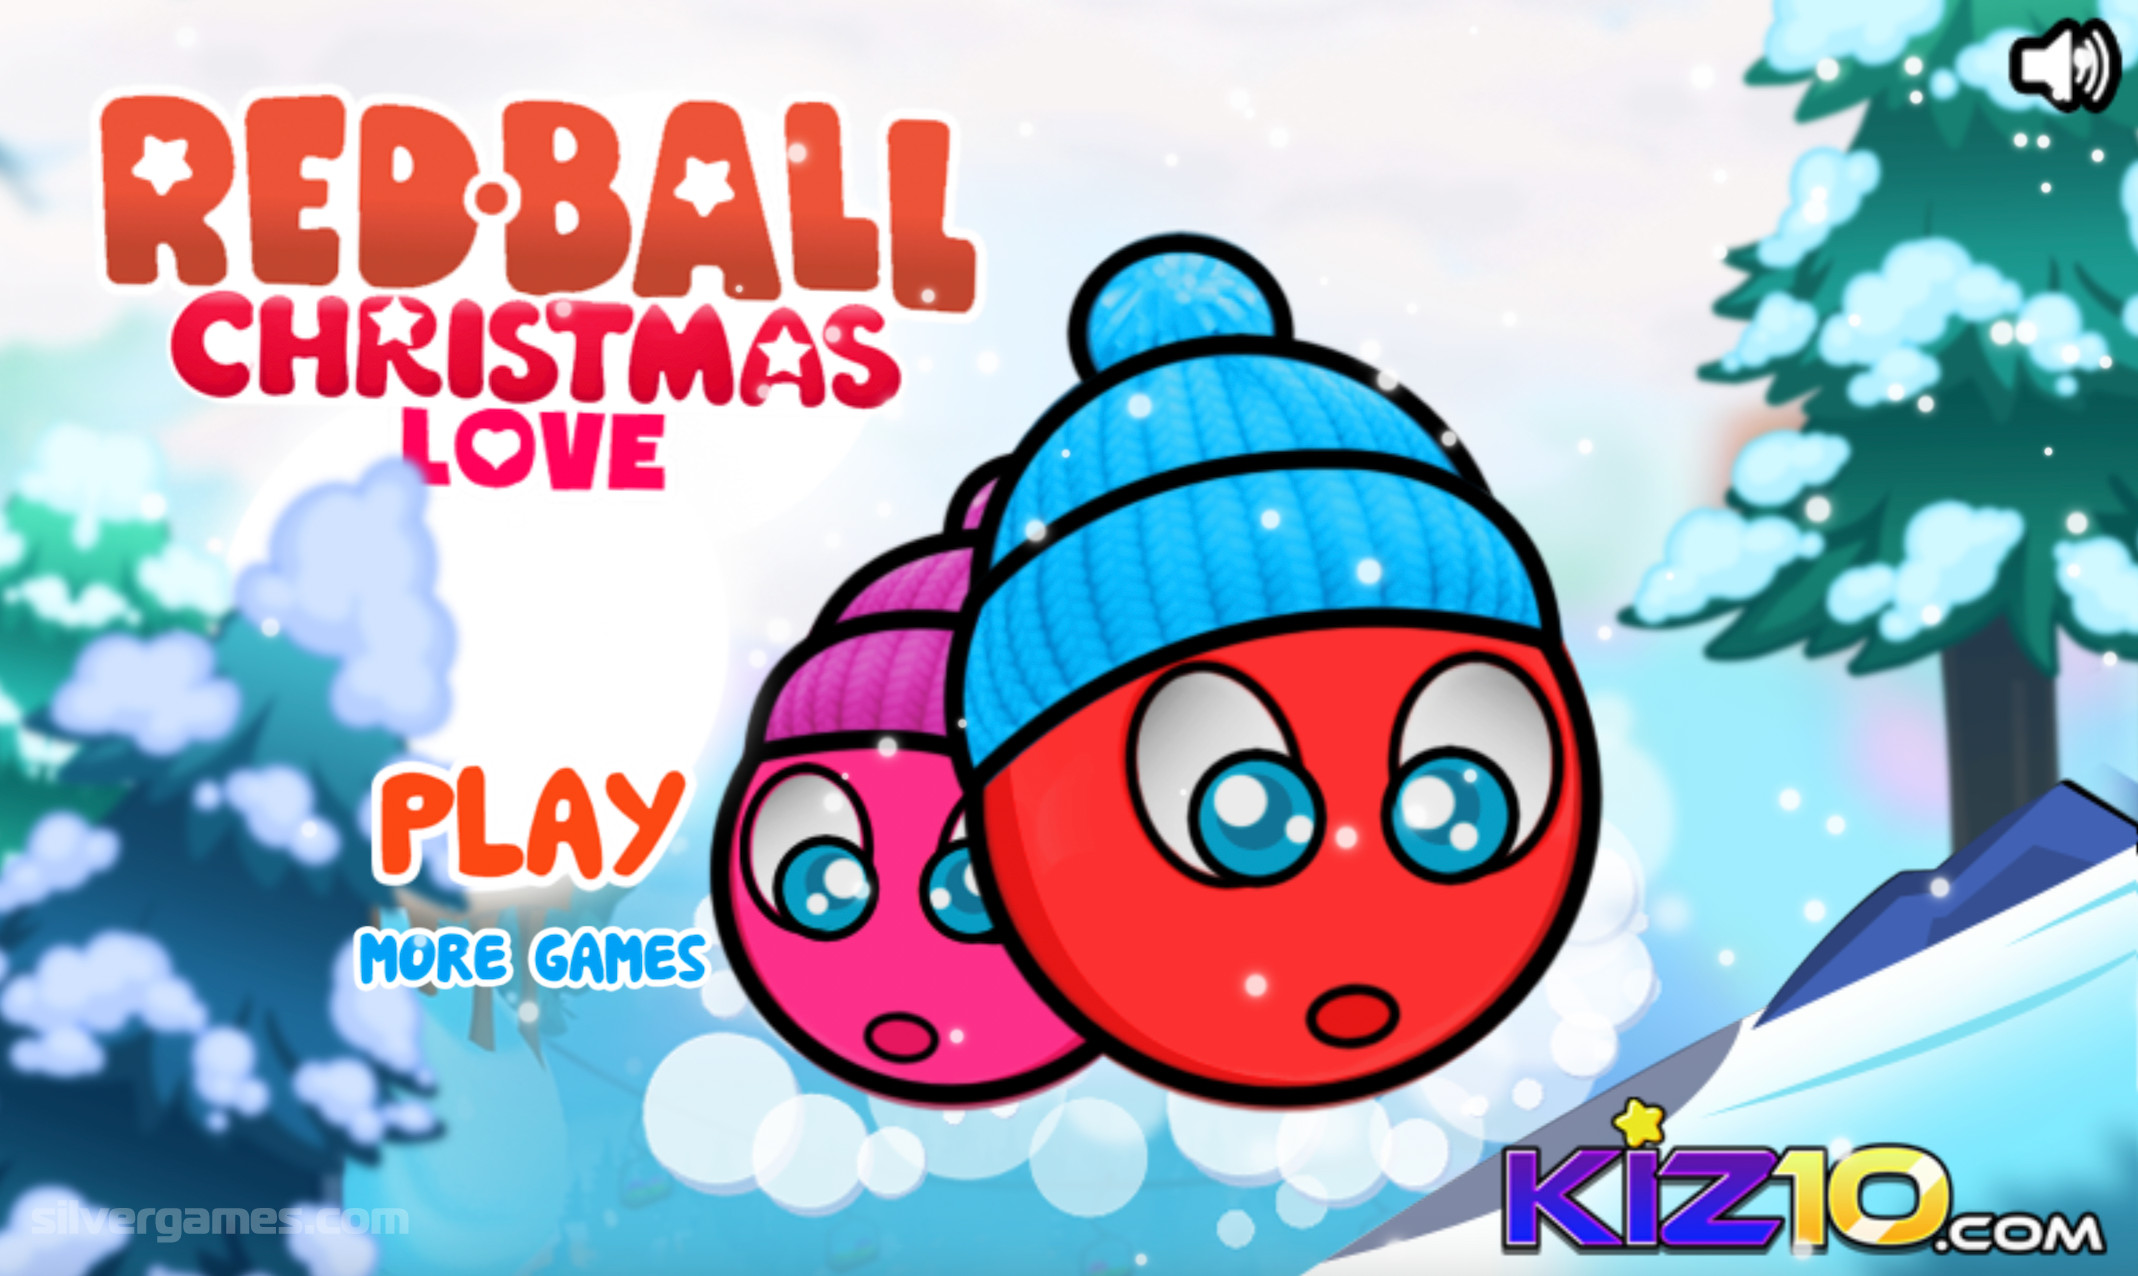 red ball 3 free online game